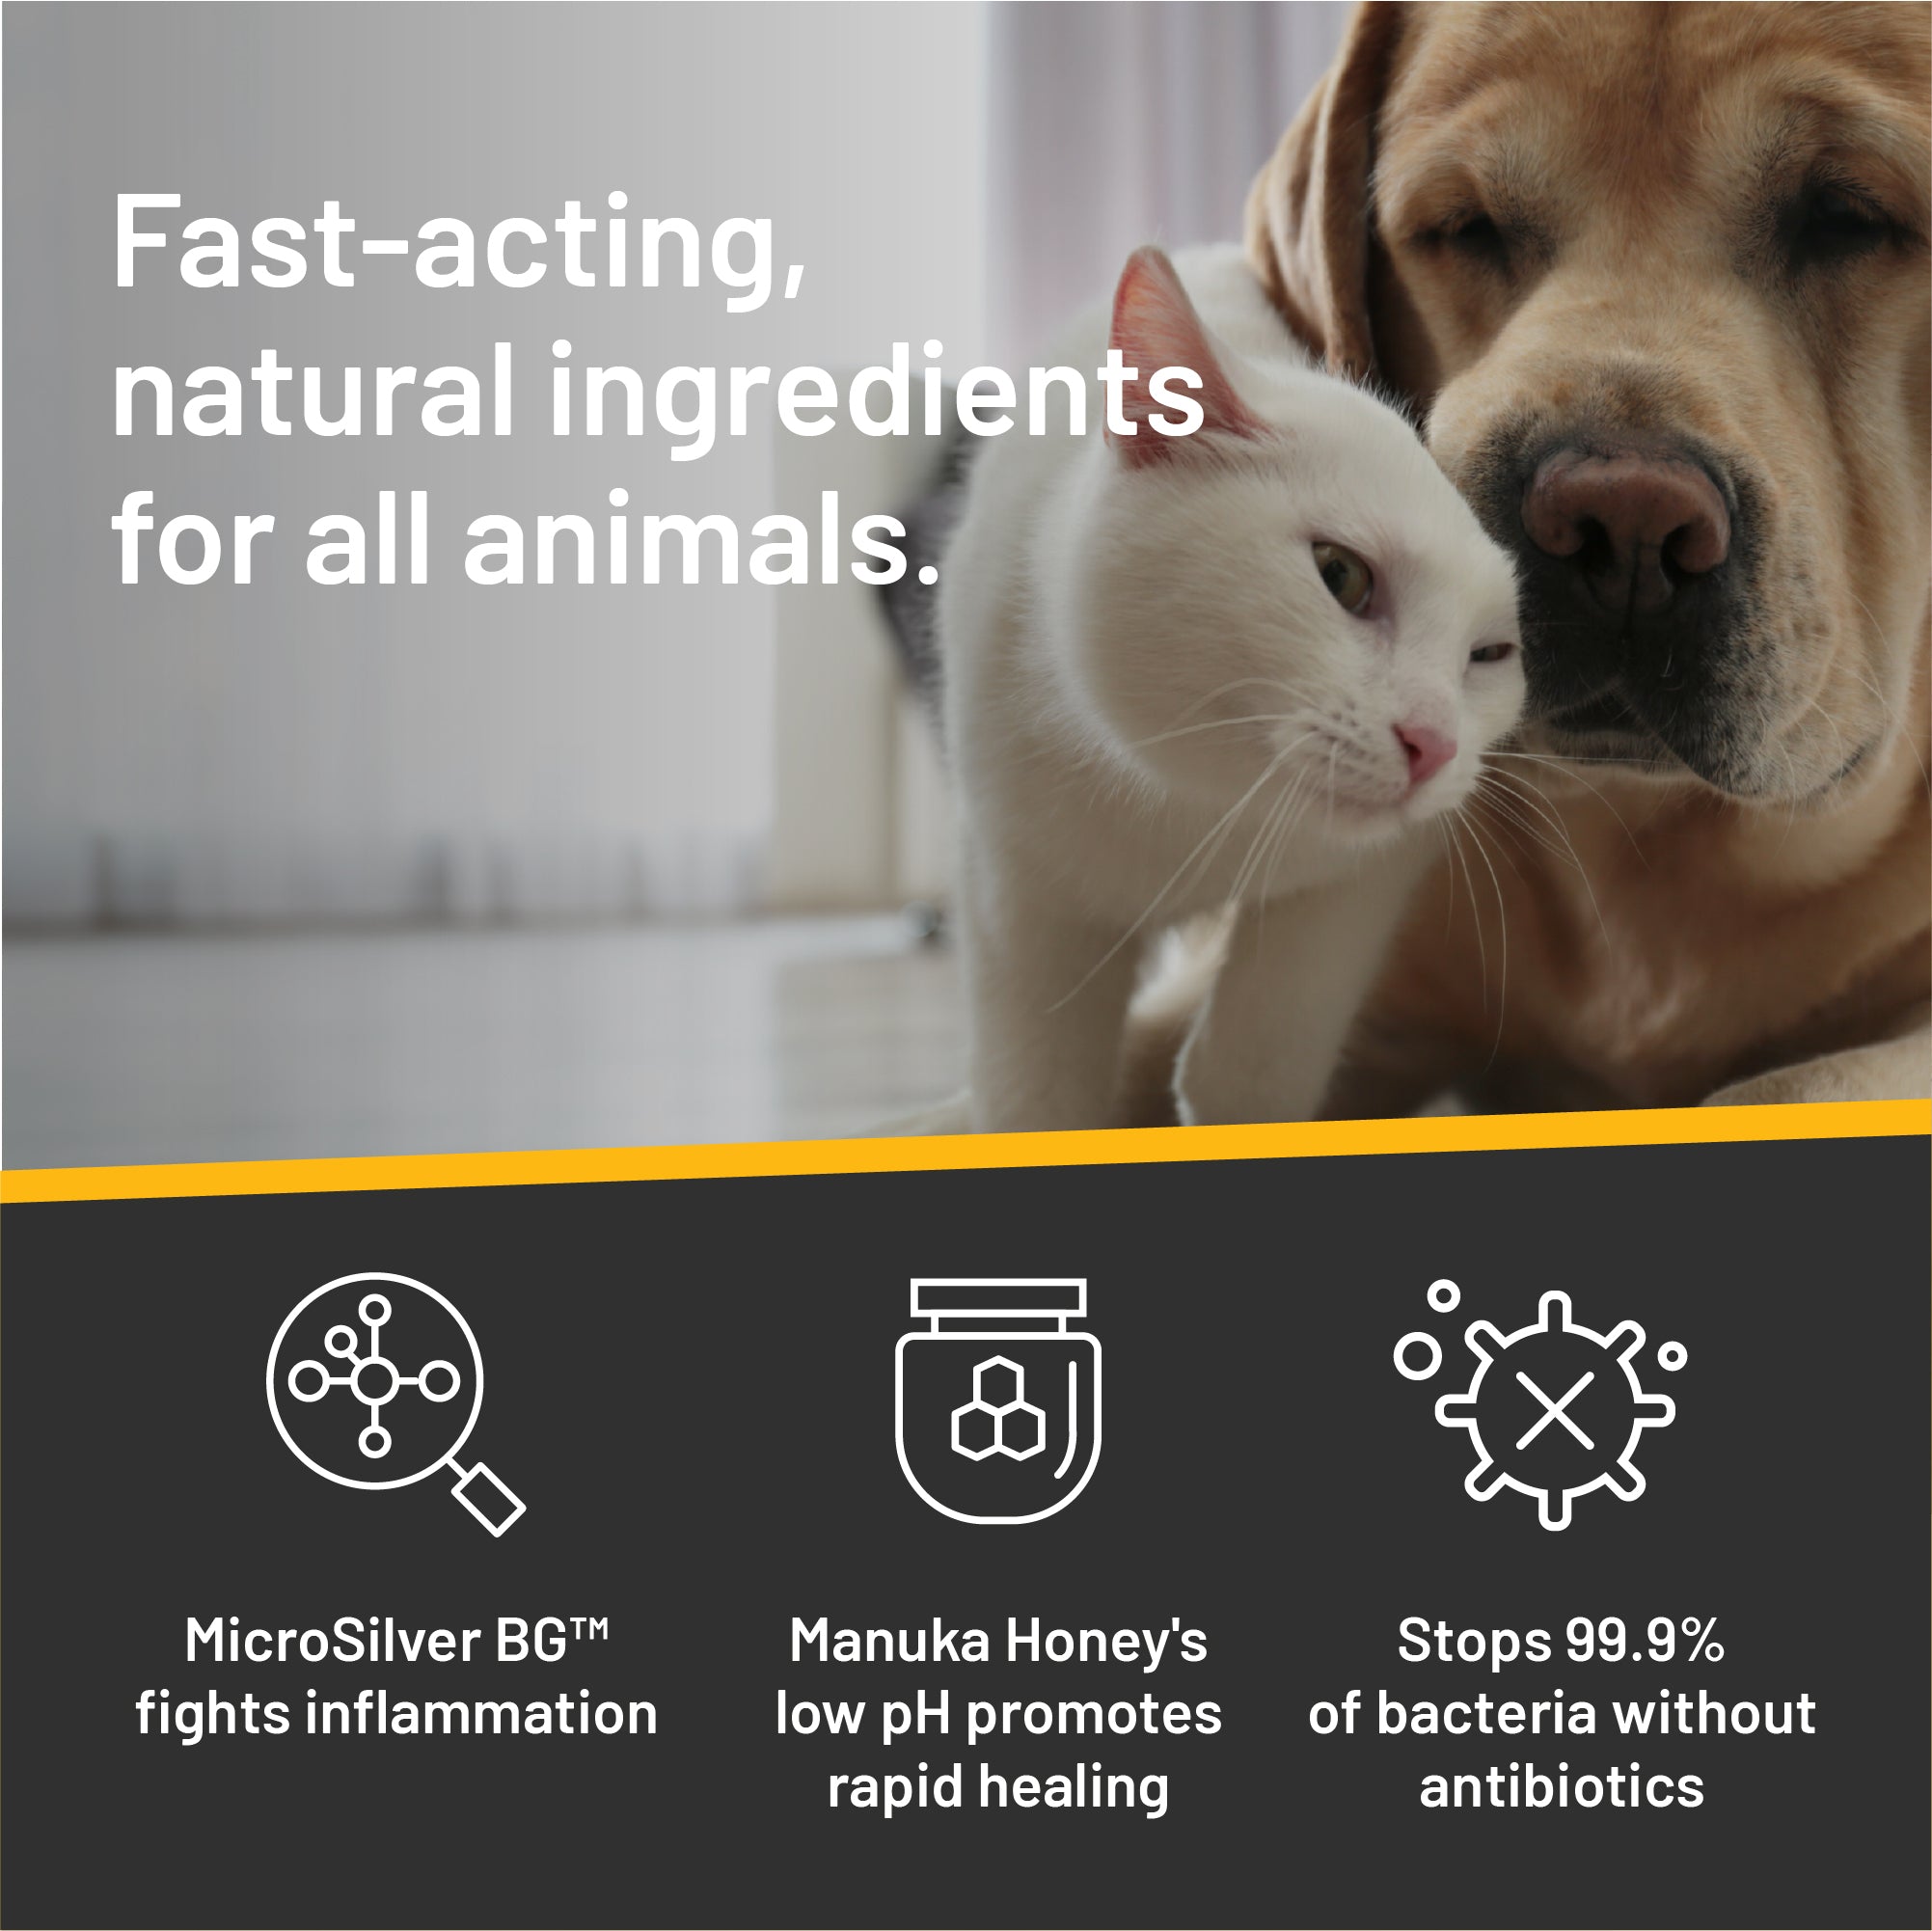 White cat snuggling the nose of a big yellow lab. Fast-acting natural ingredients for all animals. Microsilver BG fights inflamation. Manuka Honey's low pH promotes rapid healing. Stops 99.9% of bacteria without antibiotics.